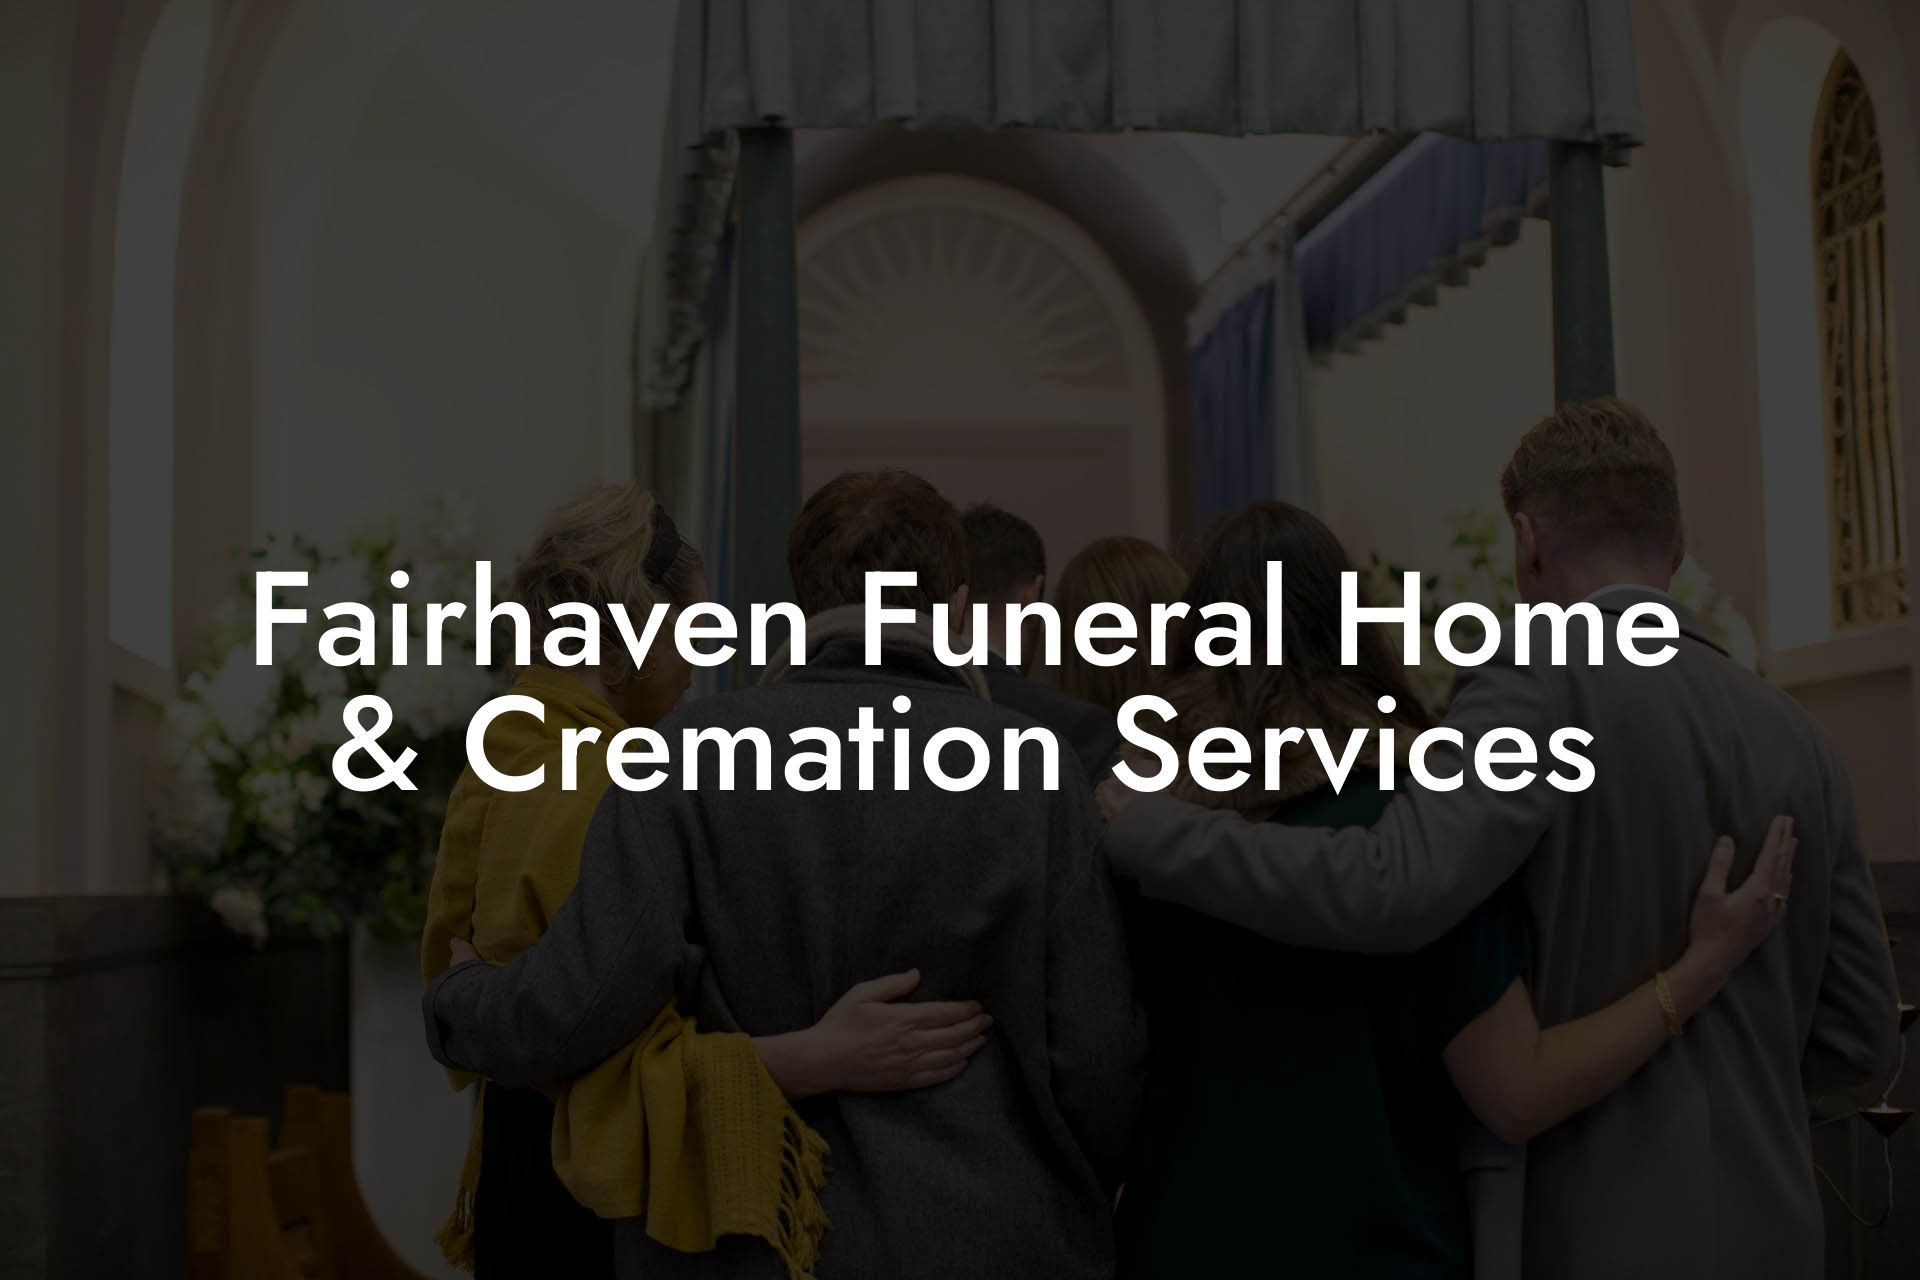 Fairhaven Funeral Home & Cremation Services